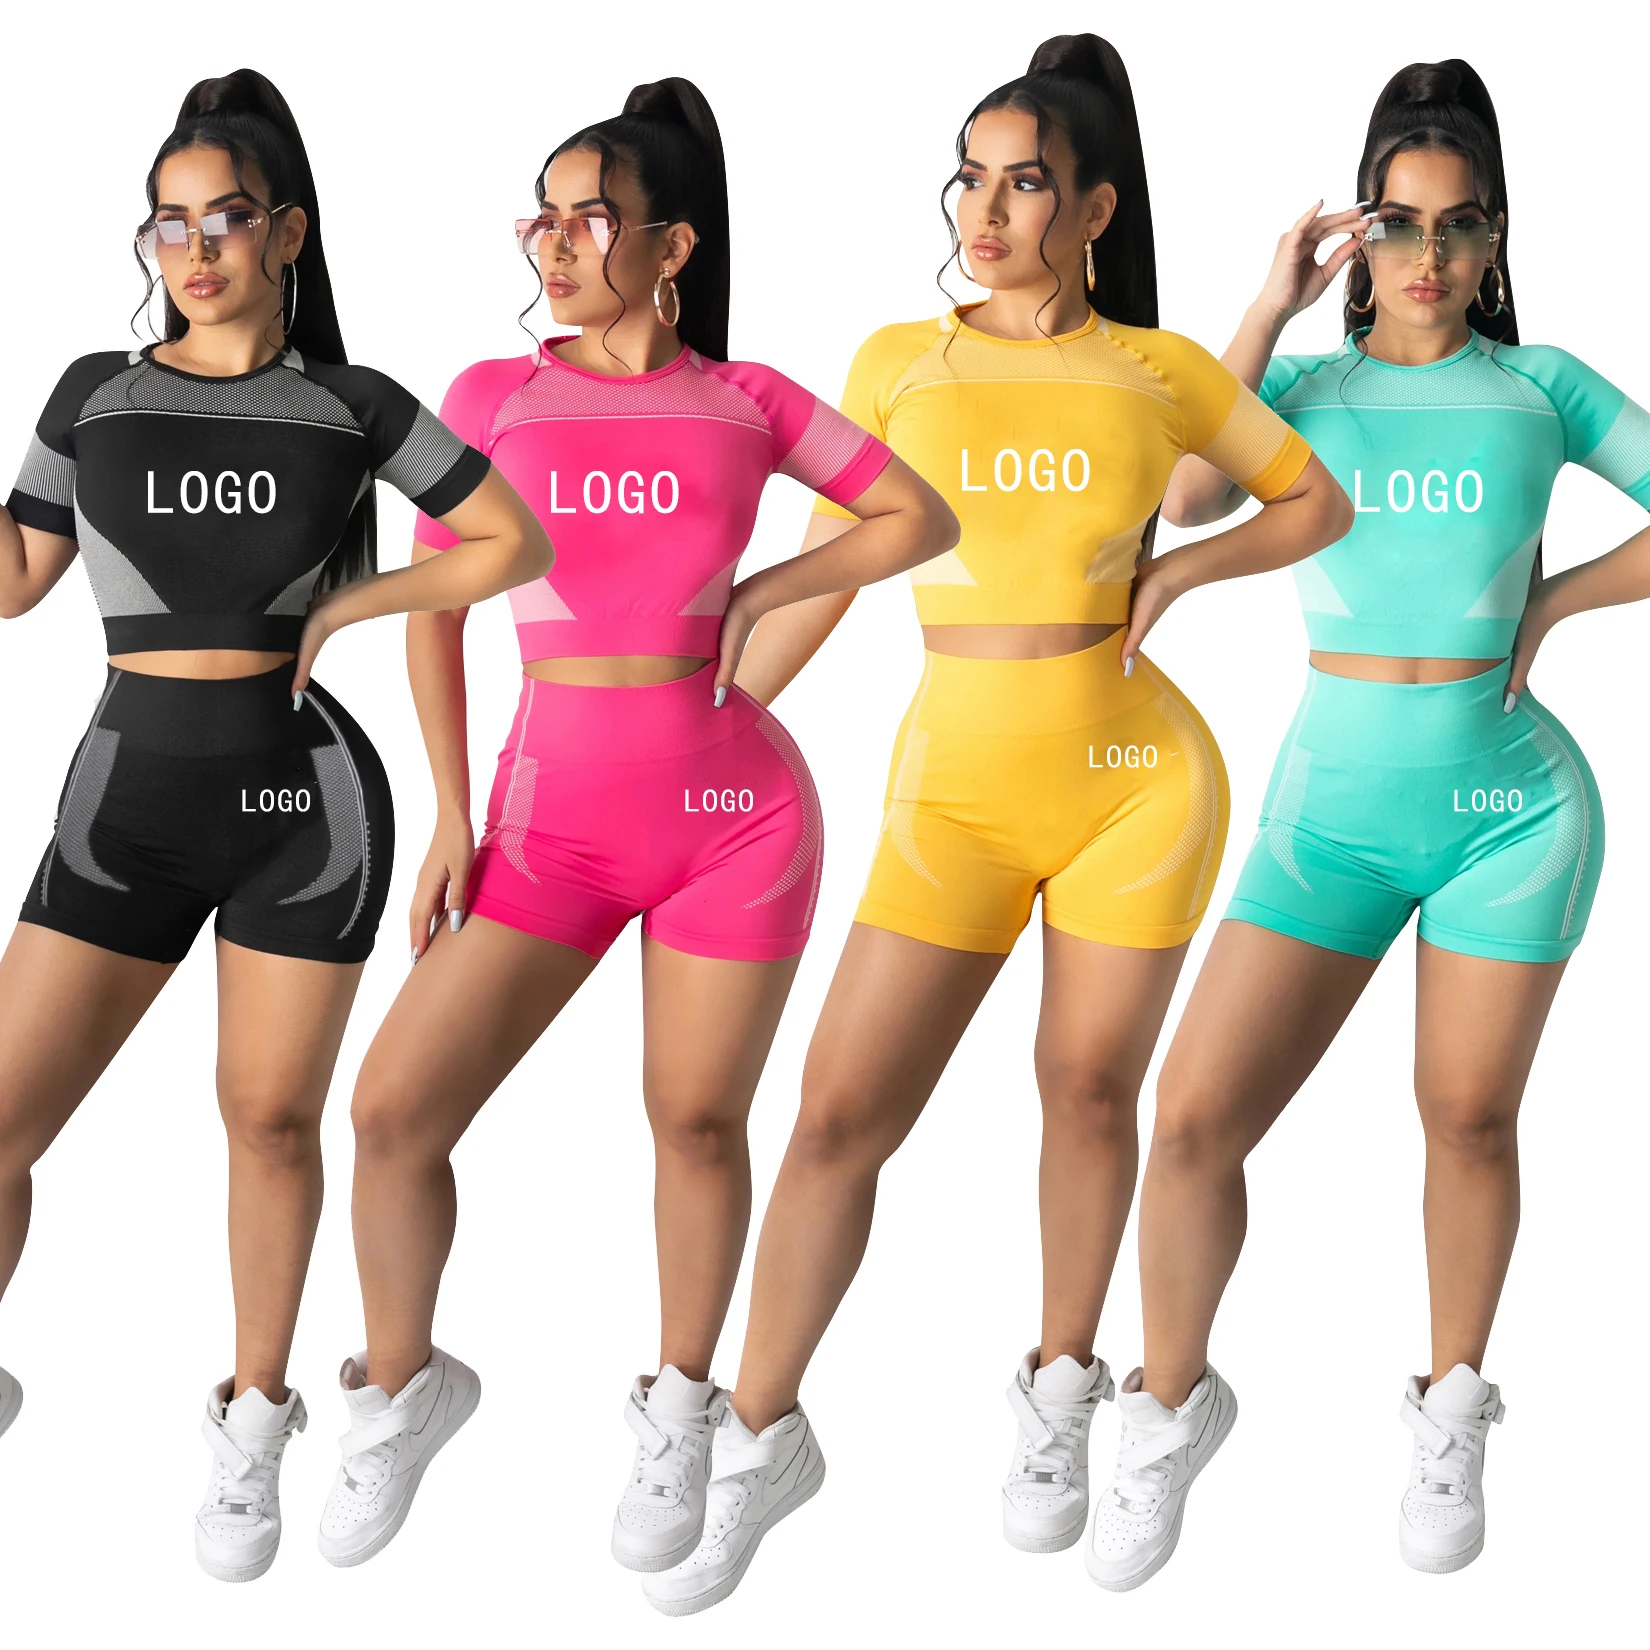 

Echoine Summer Splicing Sports Two Piece Set Women Sexy Fashion Casual Crop Tops Shorts Suit Jogger Tracksuit Matching Outfits